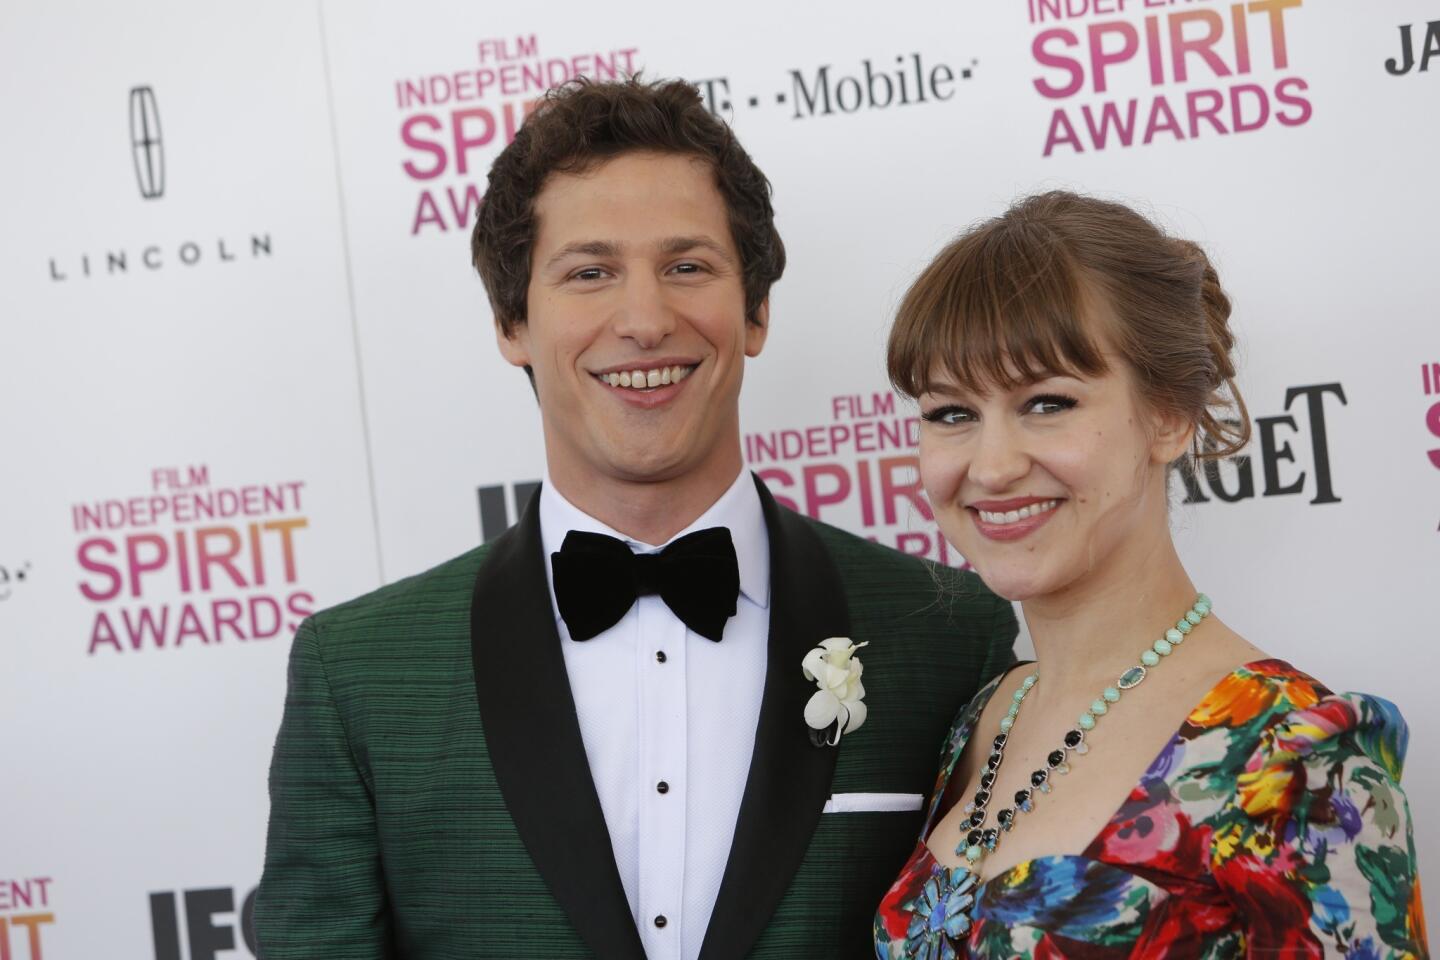 Comedian and actor Andy Samberg, who hosted the gala, and his fiancee, musician Joanna Newsom.